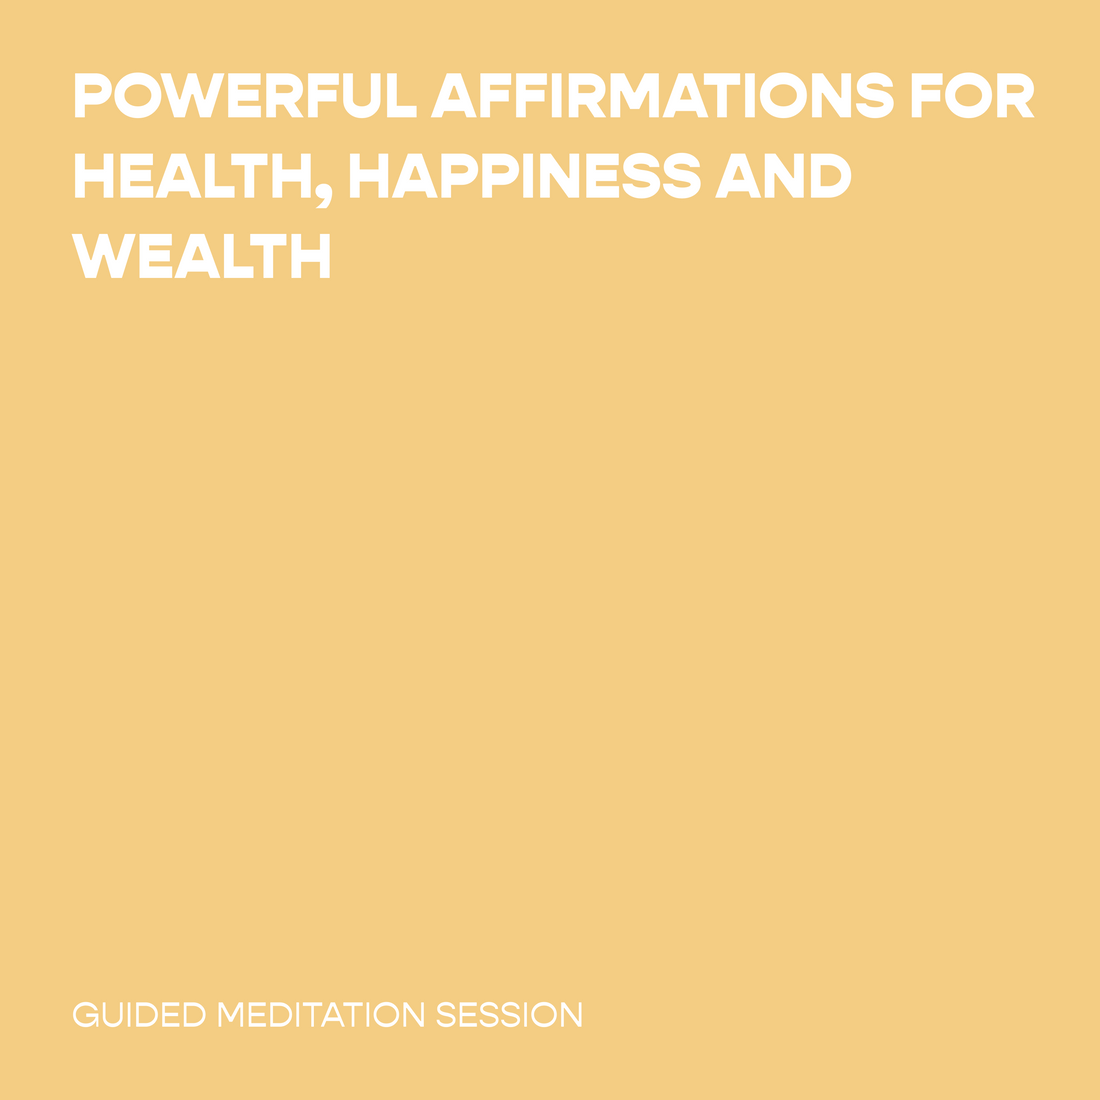 Powerful Affirmations for Health, Happiness and Wealth